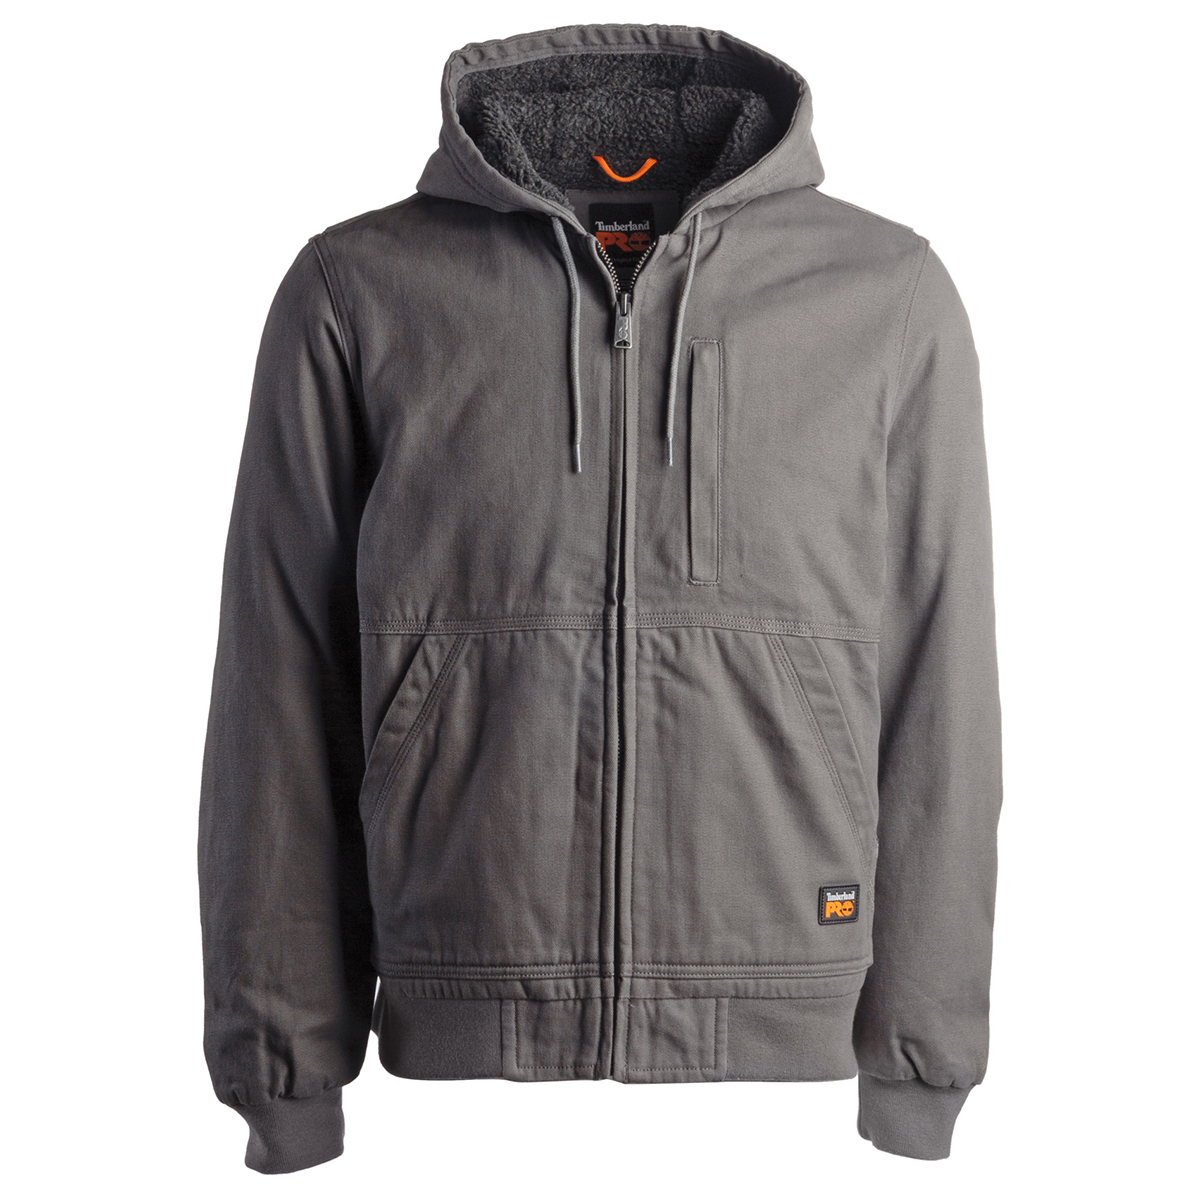 Timberland Pro Men's Gritman Lined Hooded Jacket